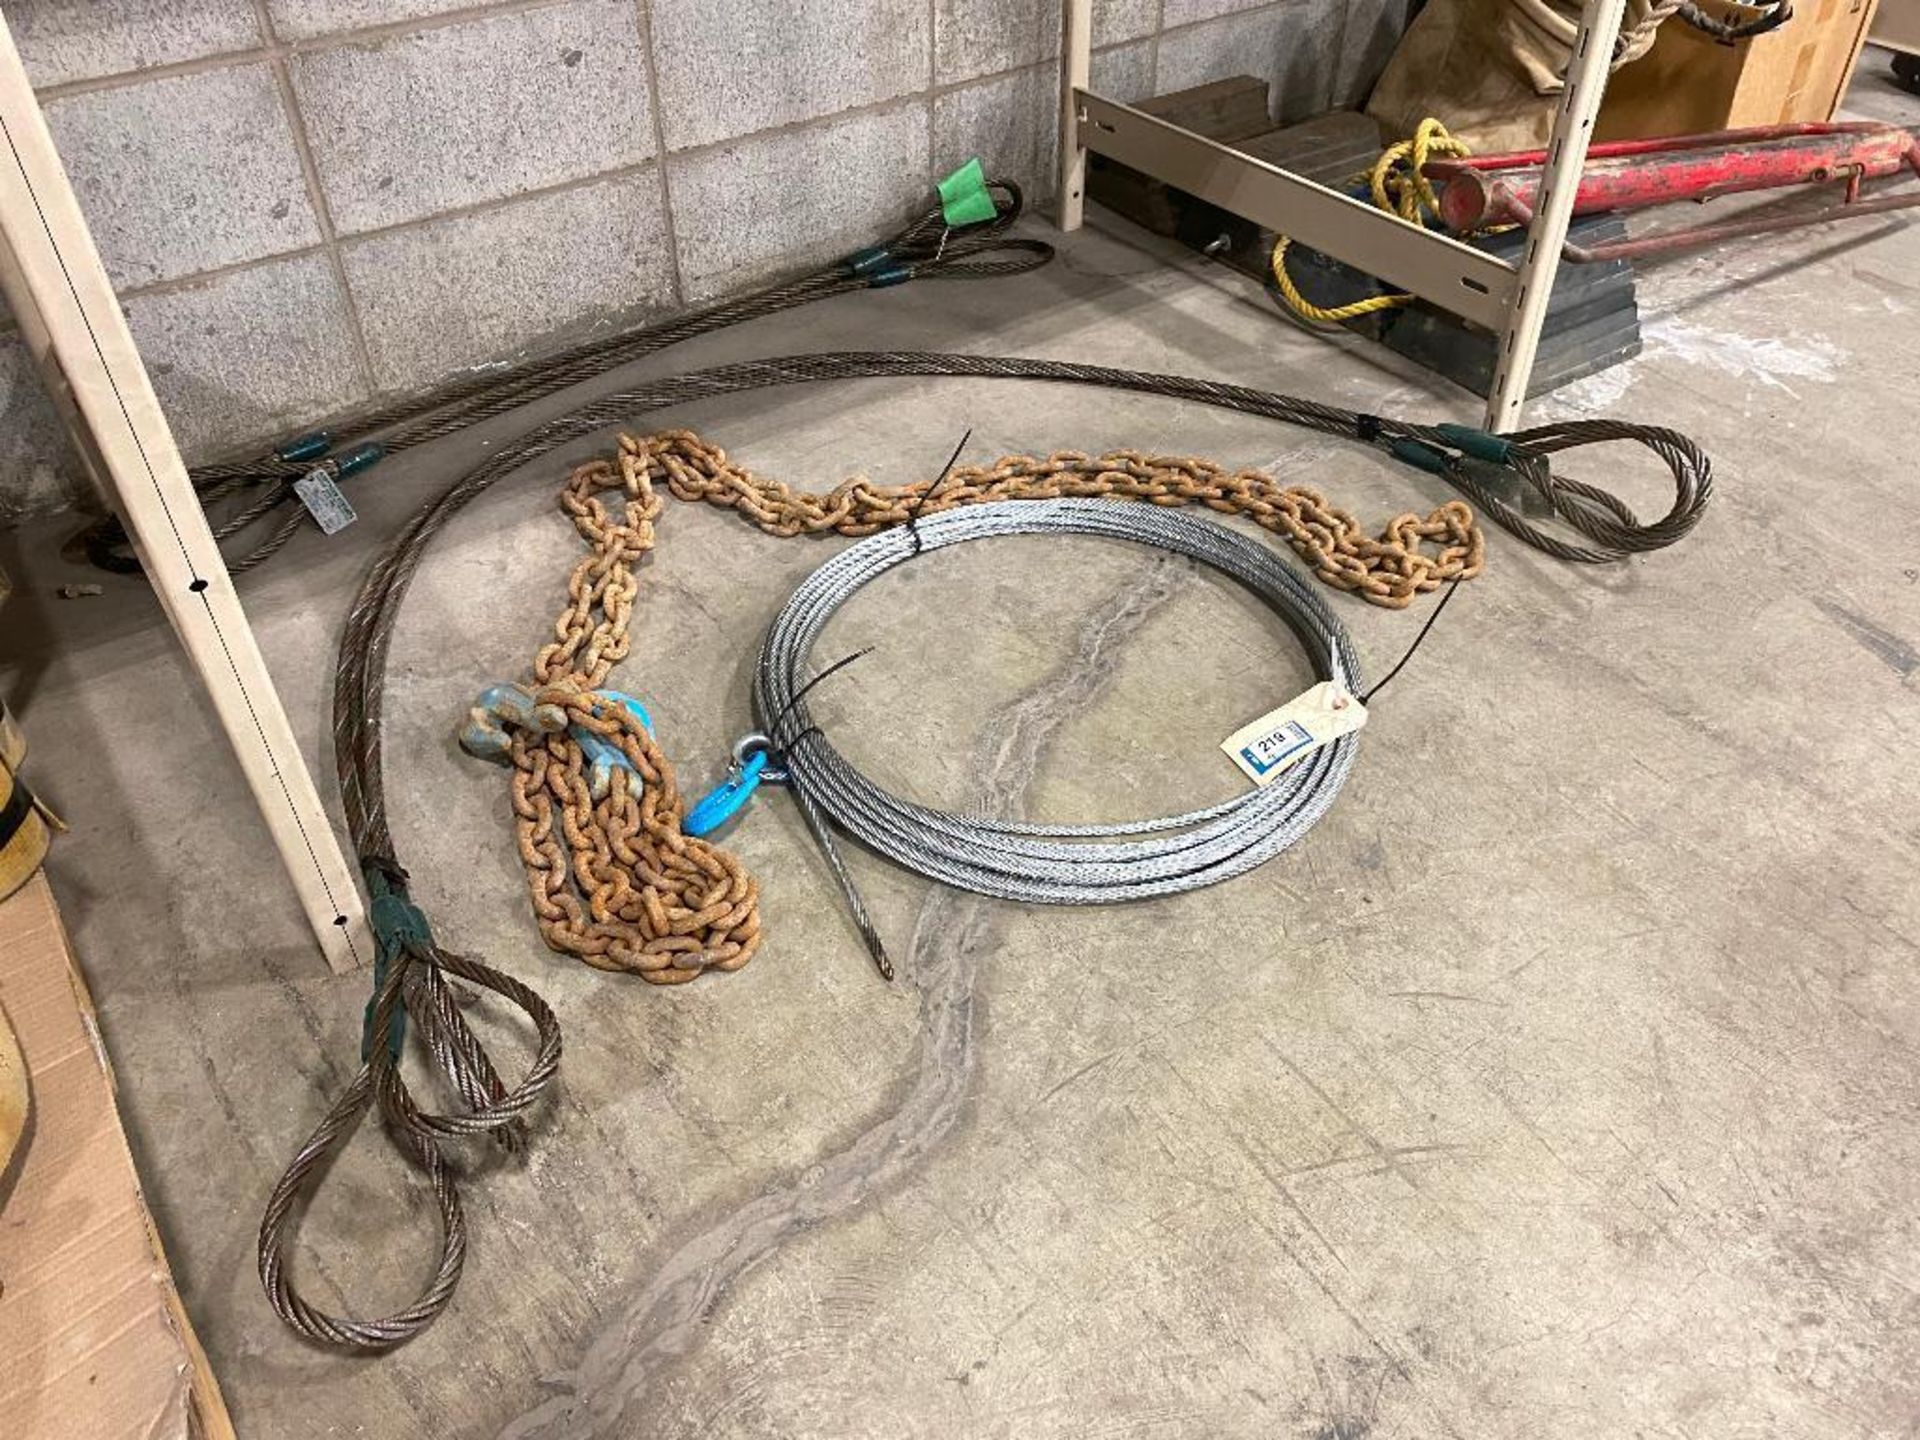 Lot of Asst. Cable, Chains, Cable Slings, etc. - Image 3 of 6